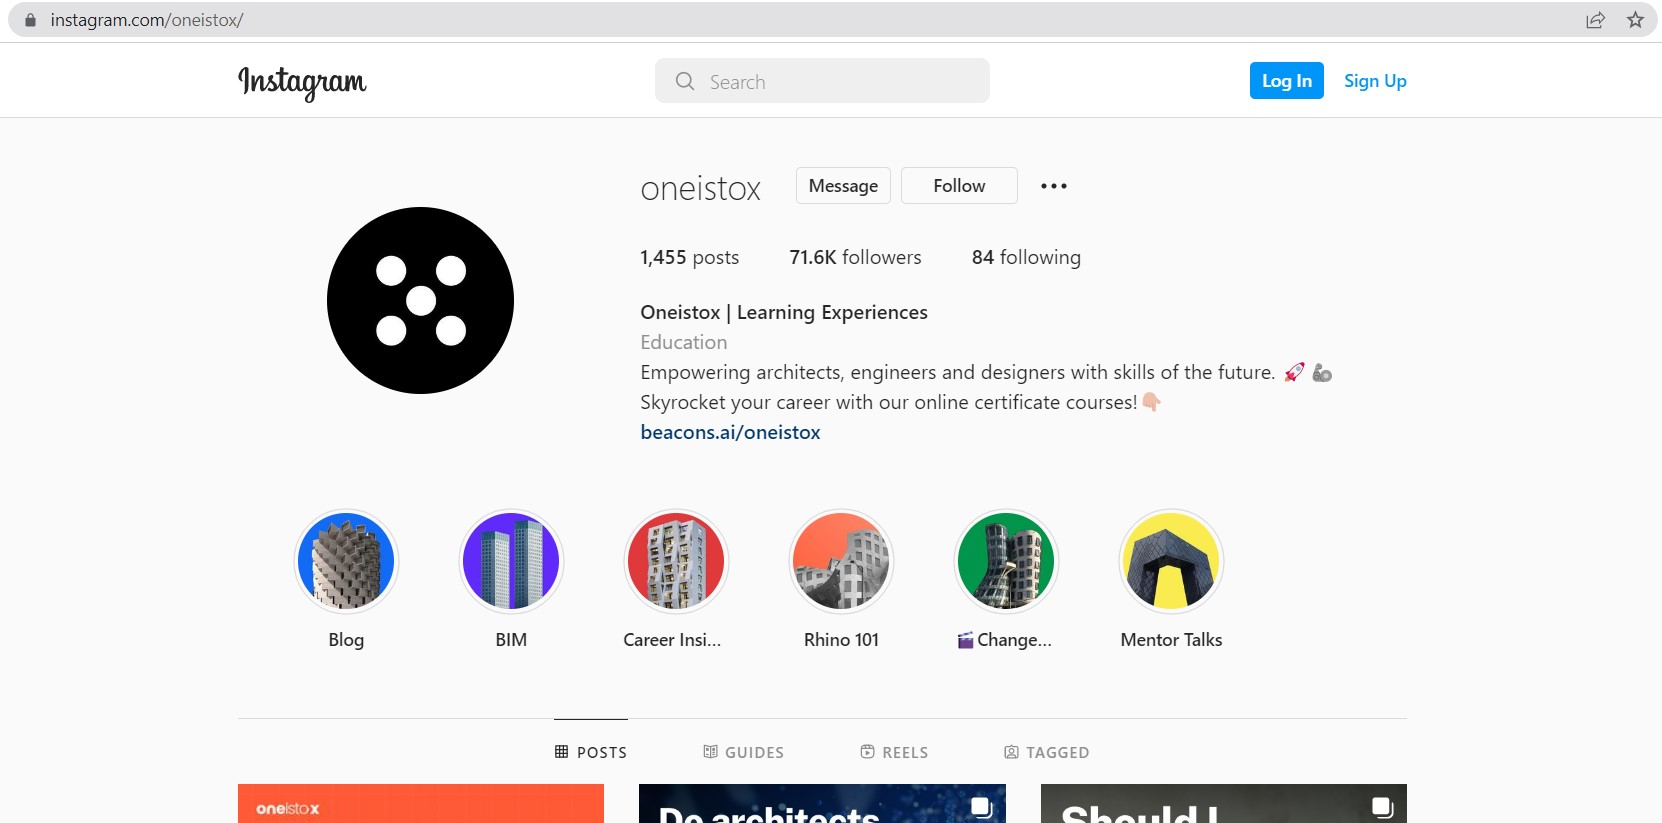 A screenshot of the Instagram page for Oneistox